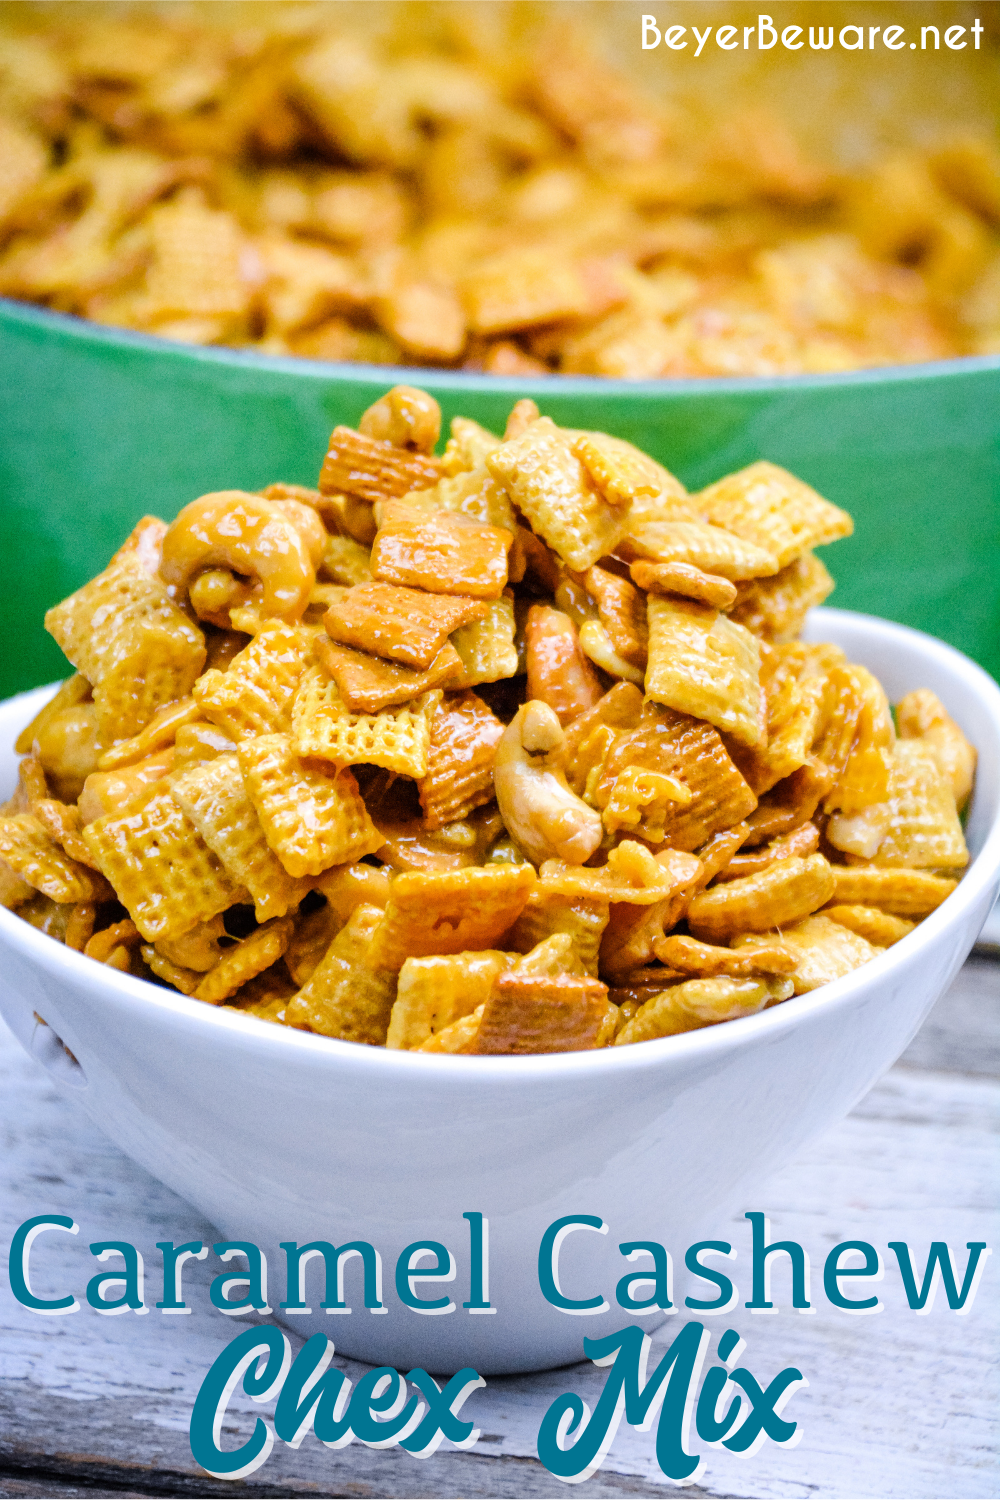 Caramel cashew chex mix is a sweet snack mix that combines Chex, Golden Grahams, and cashews for a sweet and salt chex mix recipe.